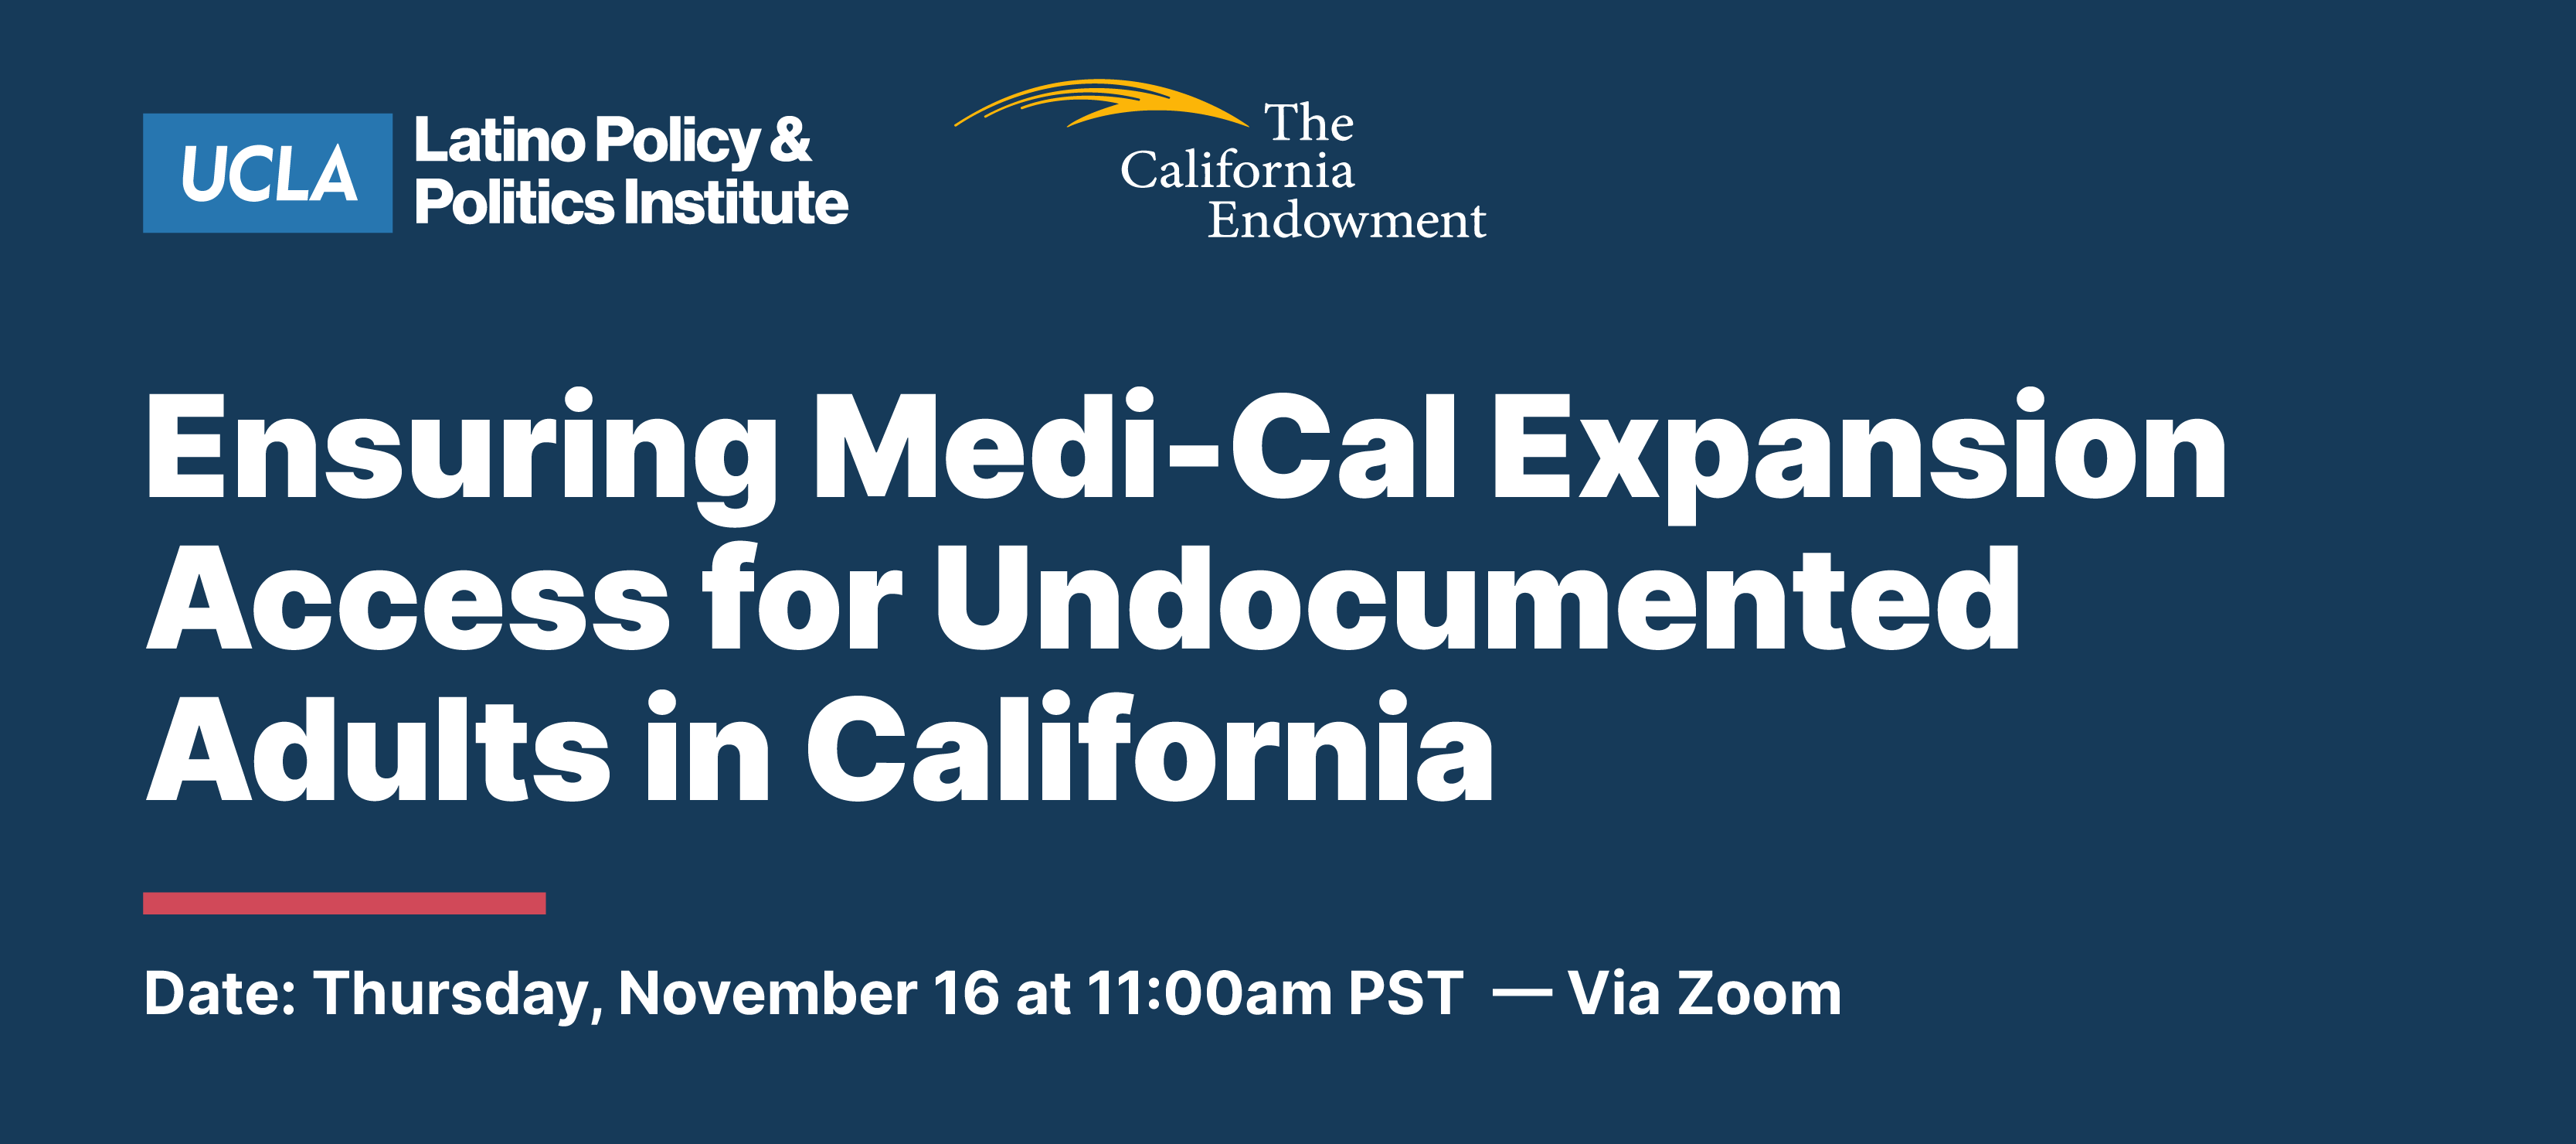 Ensuring Medi-Cal Expansion Access for Undocumented Adults in California